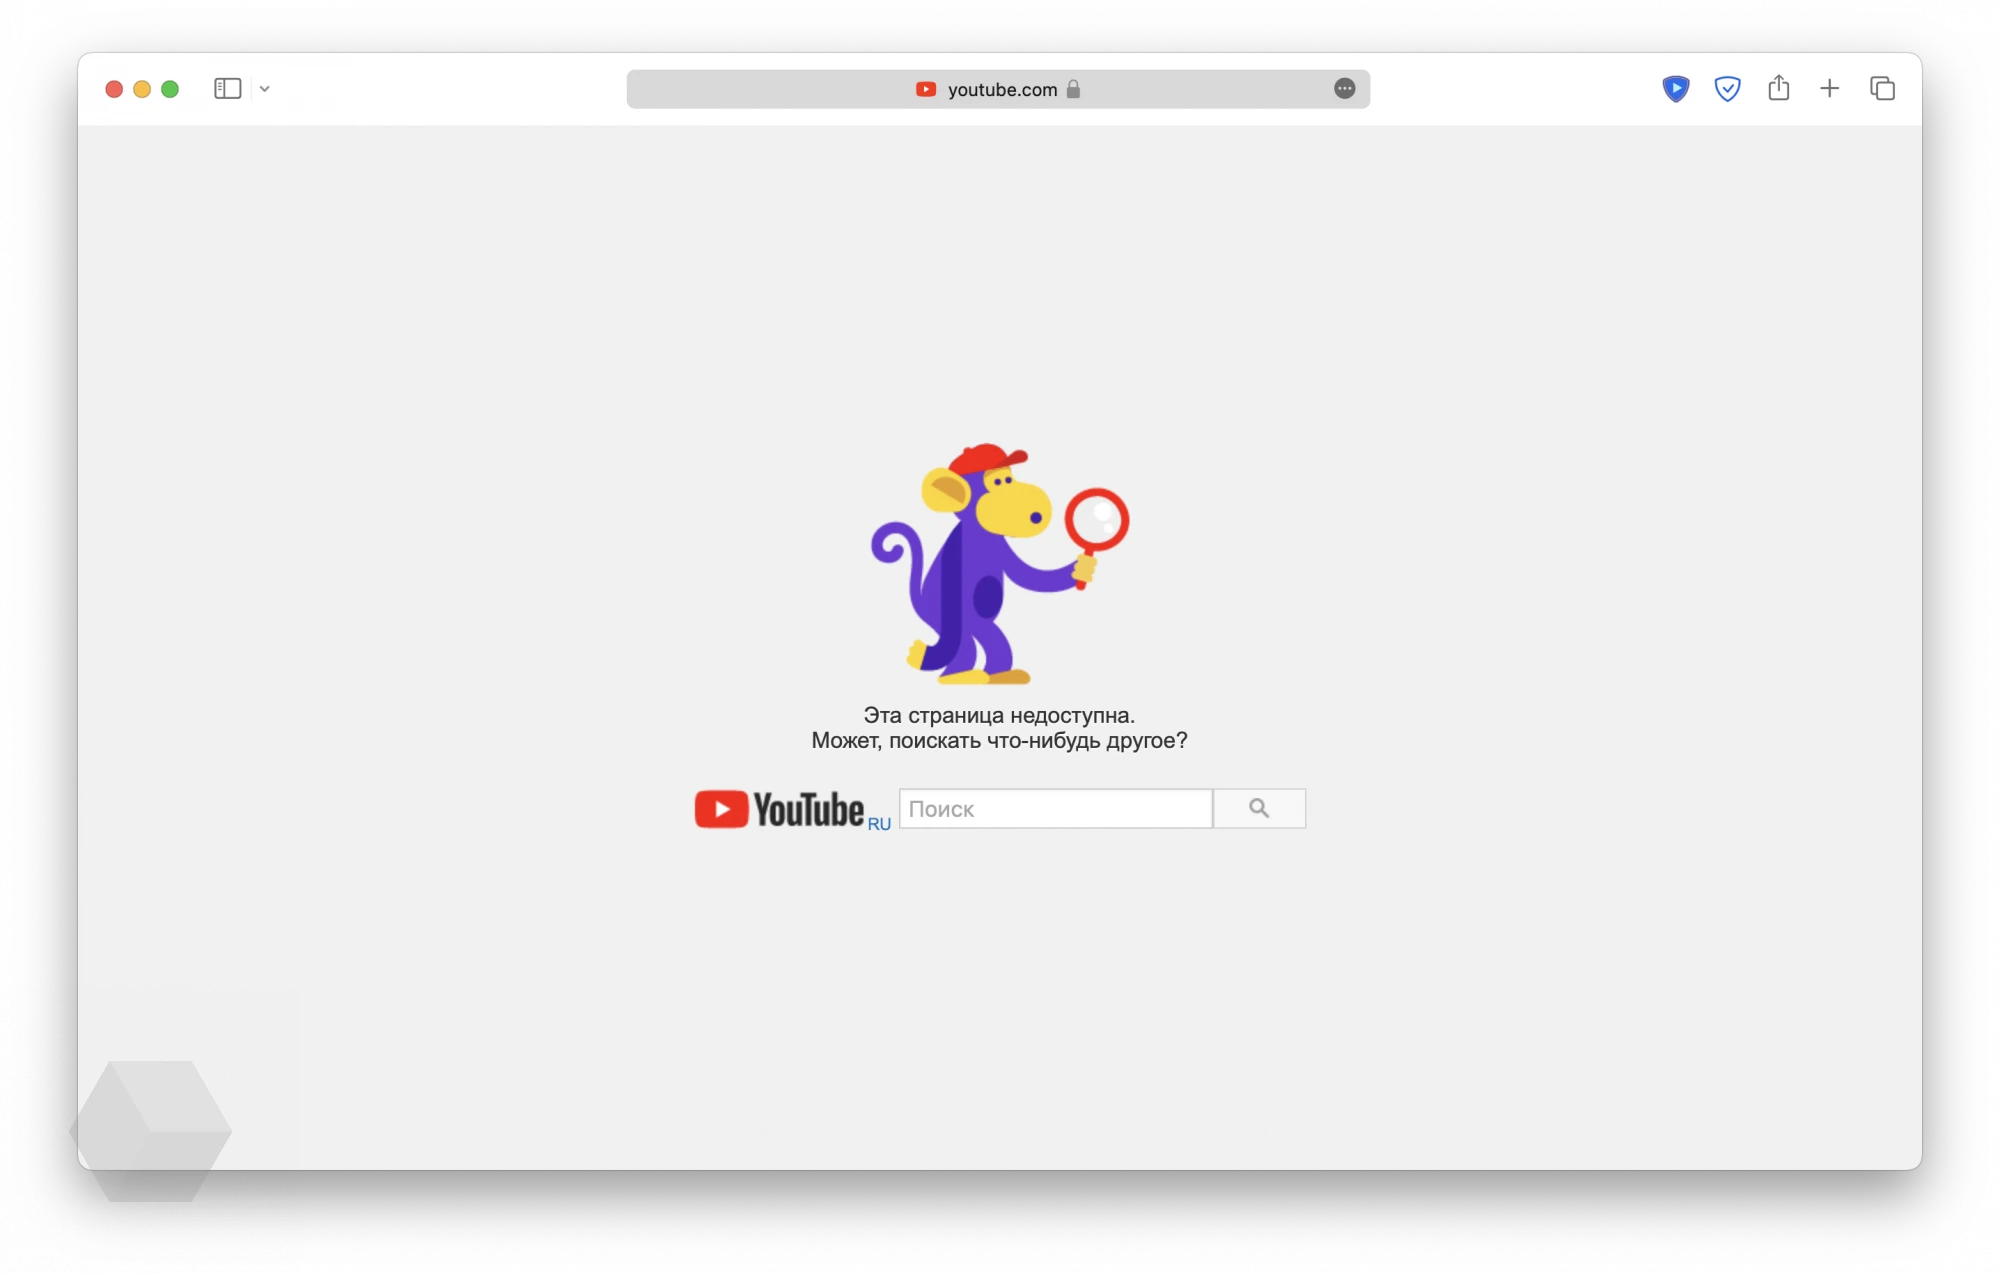 Https youtube com t restricted access 2